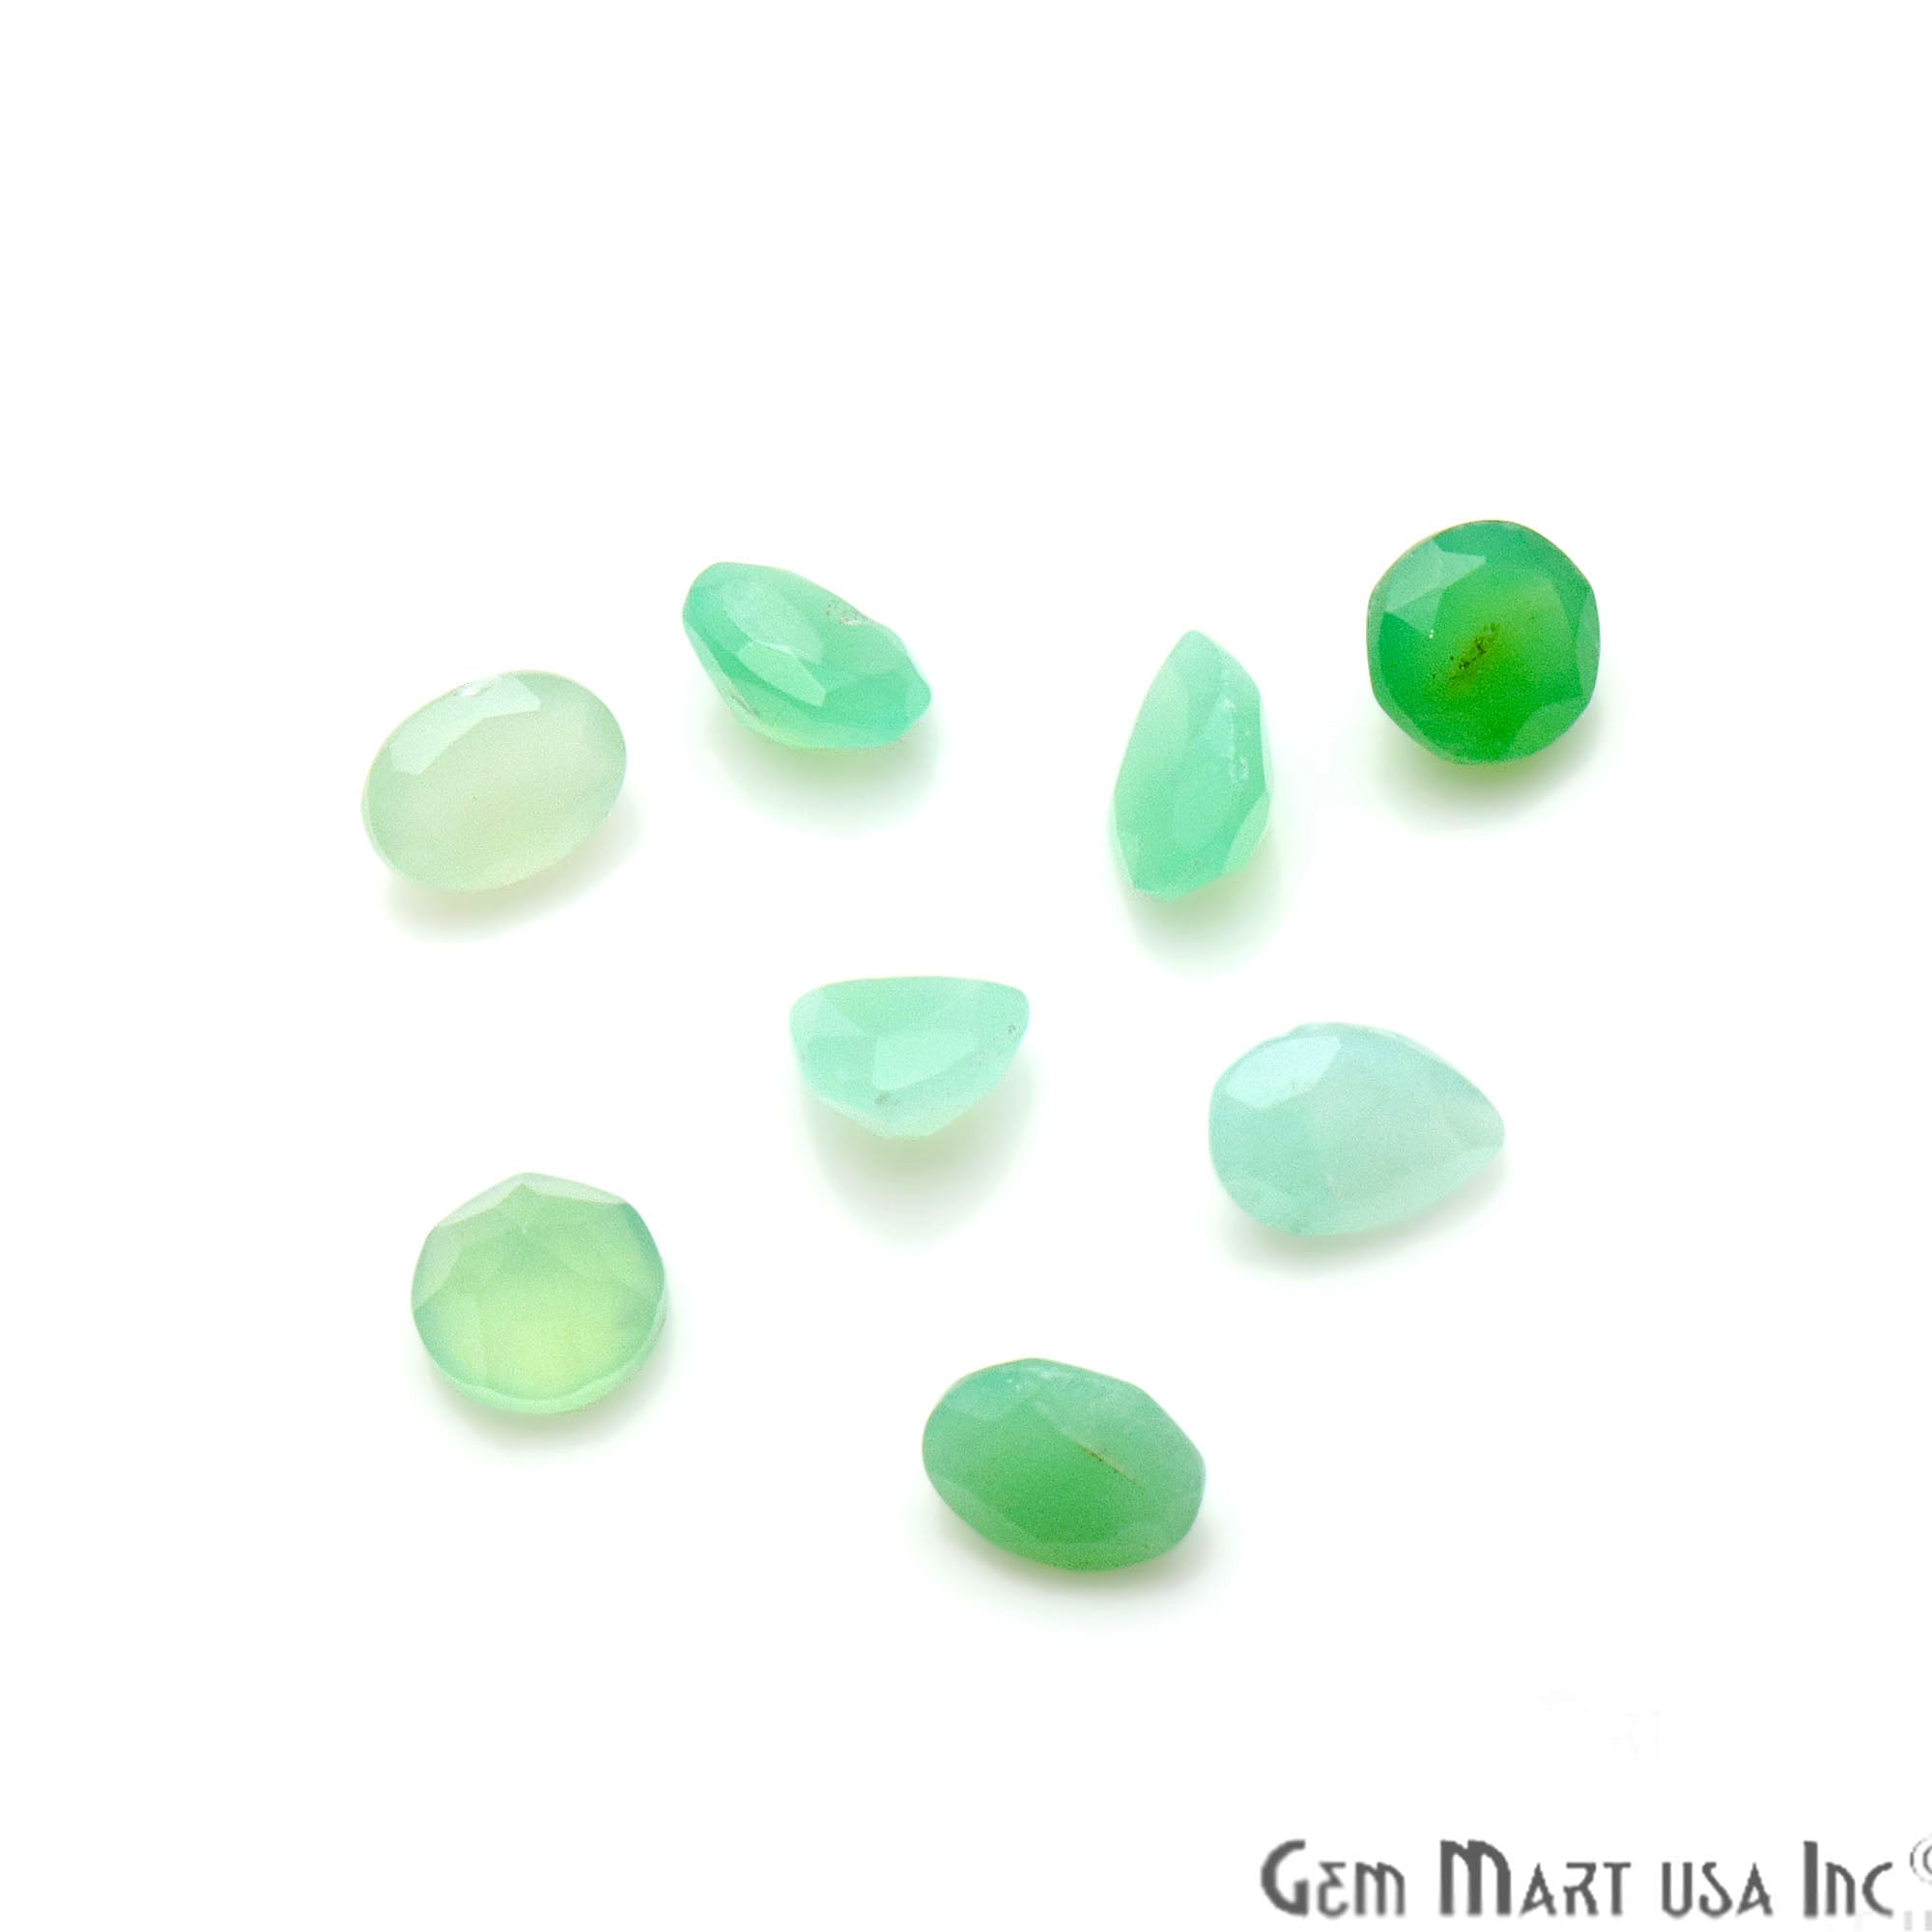 50ct Lot Chrysophrase Mix Shaped 7-8mm Stone, Faceted Gemstone Mixed lot, Loose Stones - GemMartUSA